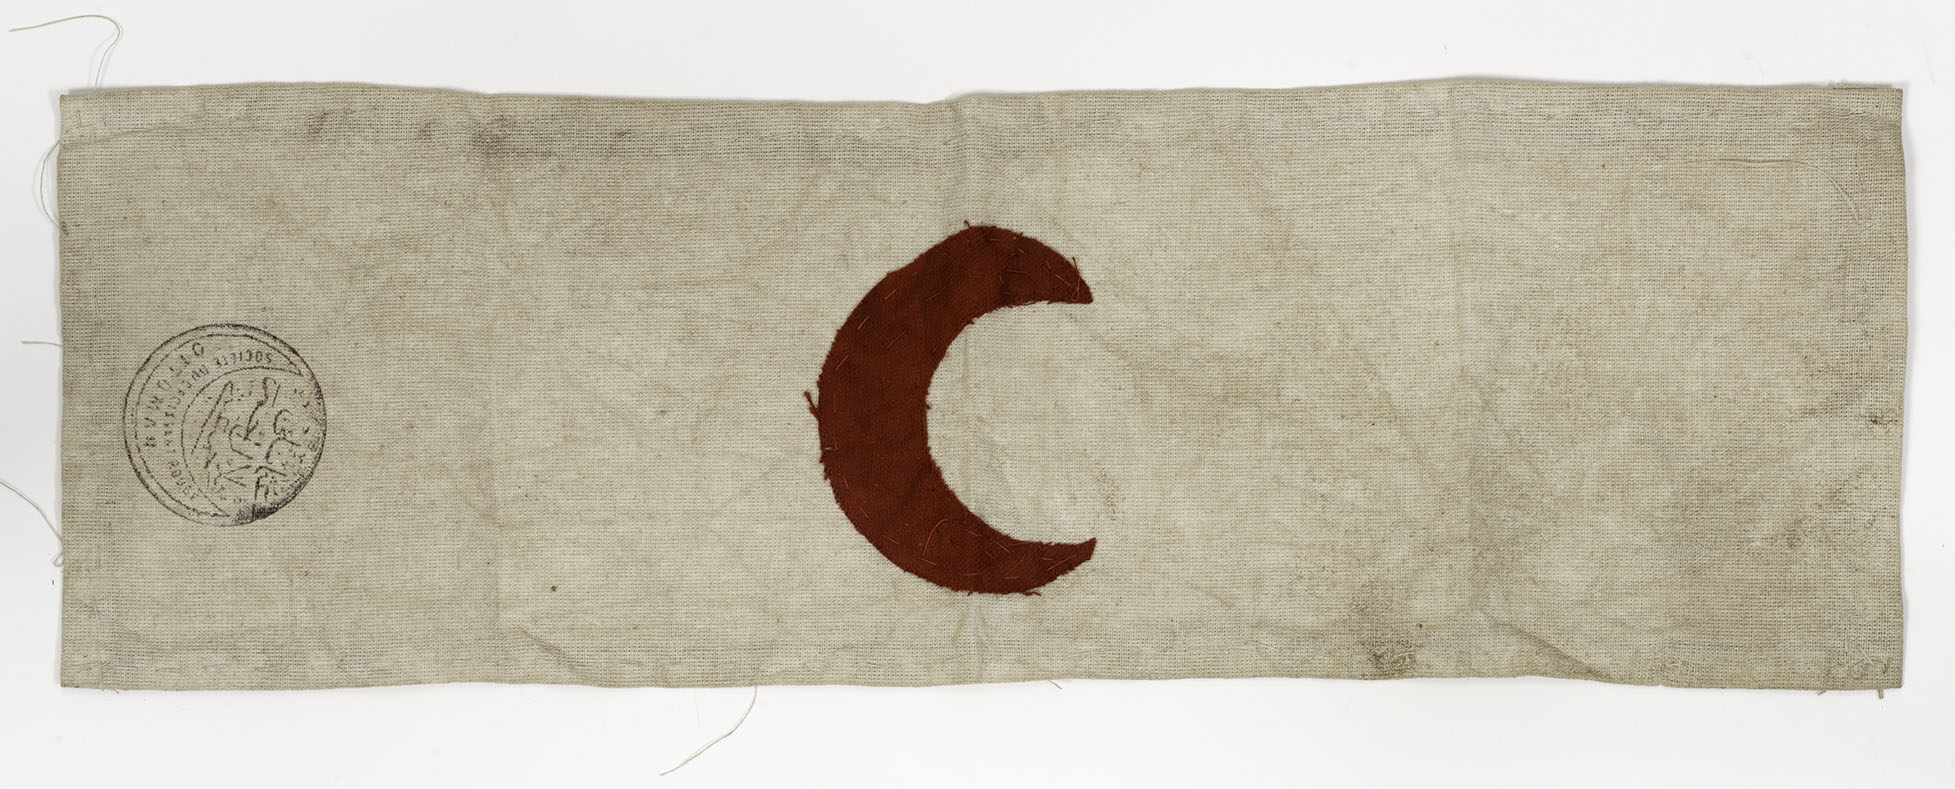 Modern photograph of an armband made of worn and aged cream-colored cloth with a red crescent shape embroidered in the middle